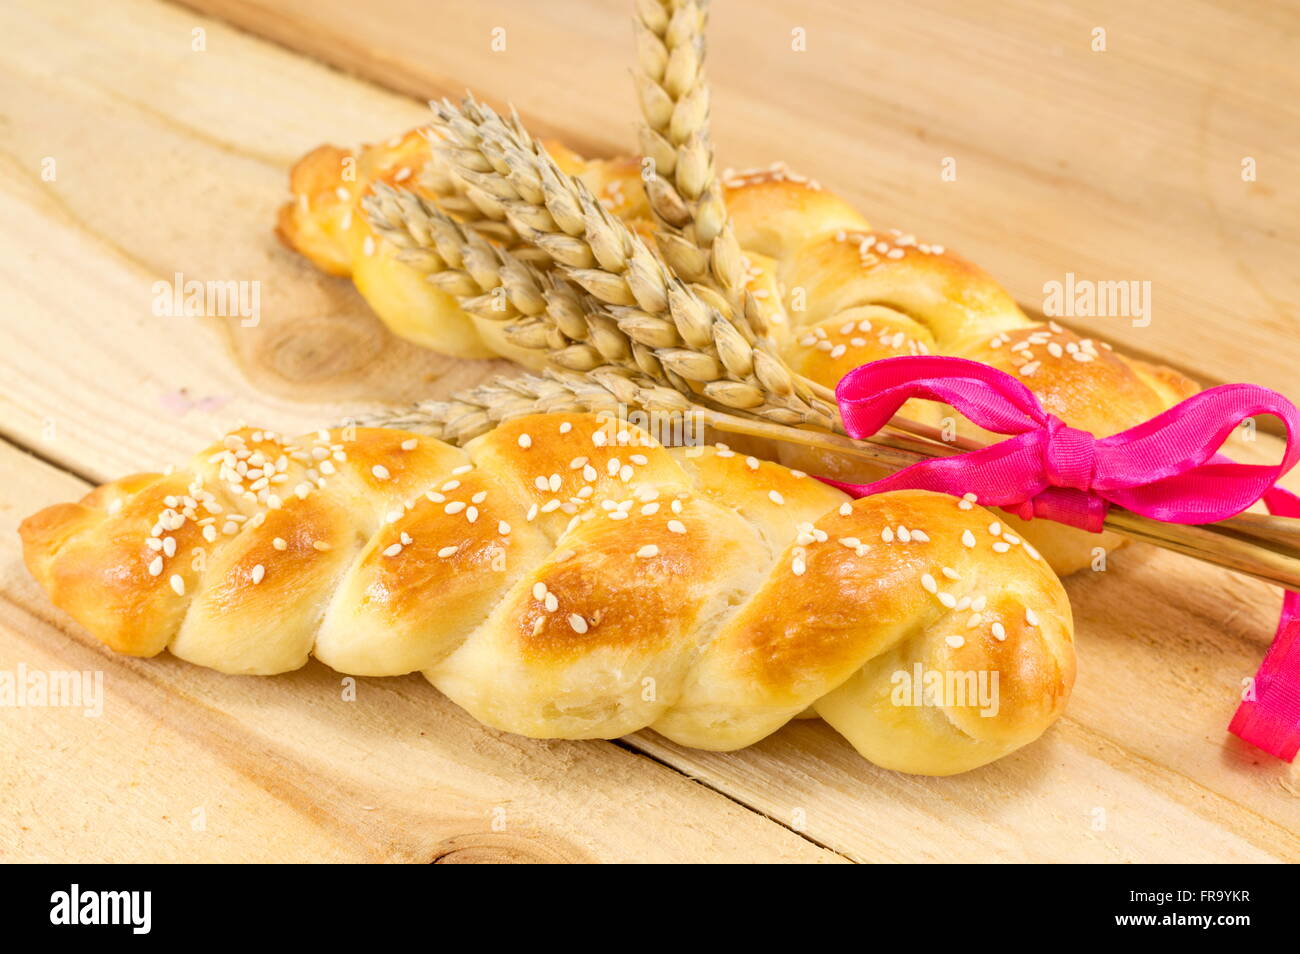 Homemade braid pastry with wheat plant and a ribbon Stock Photo